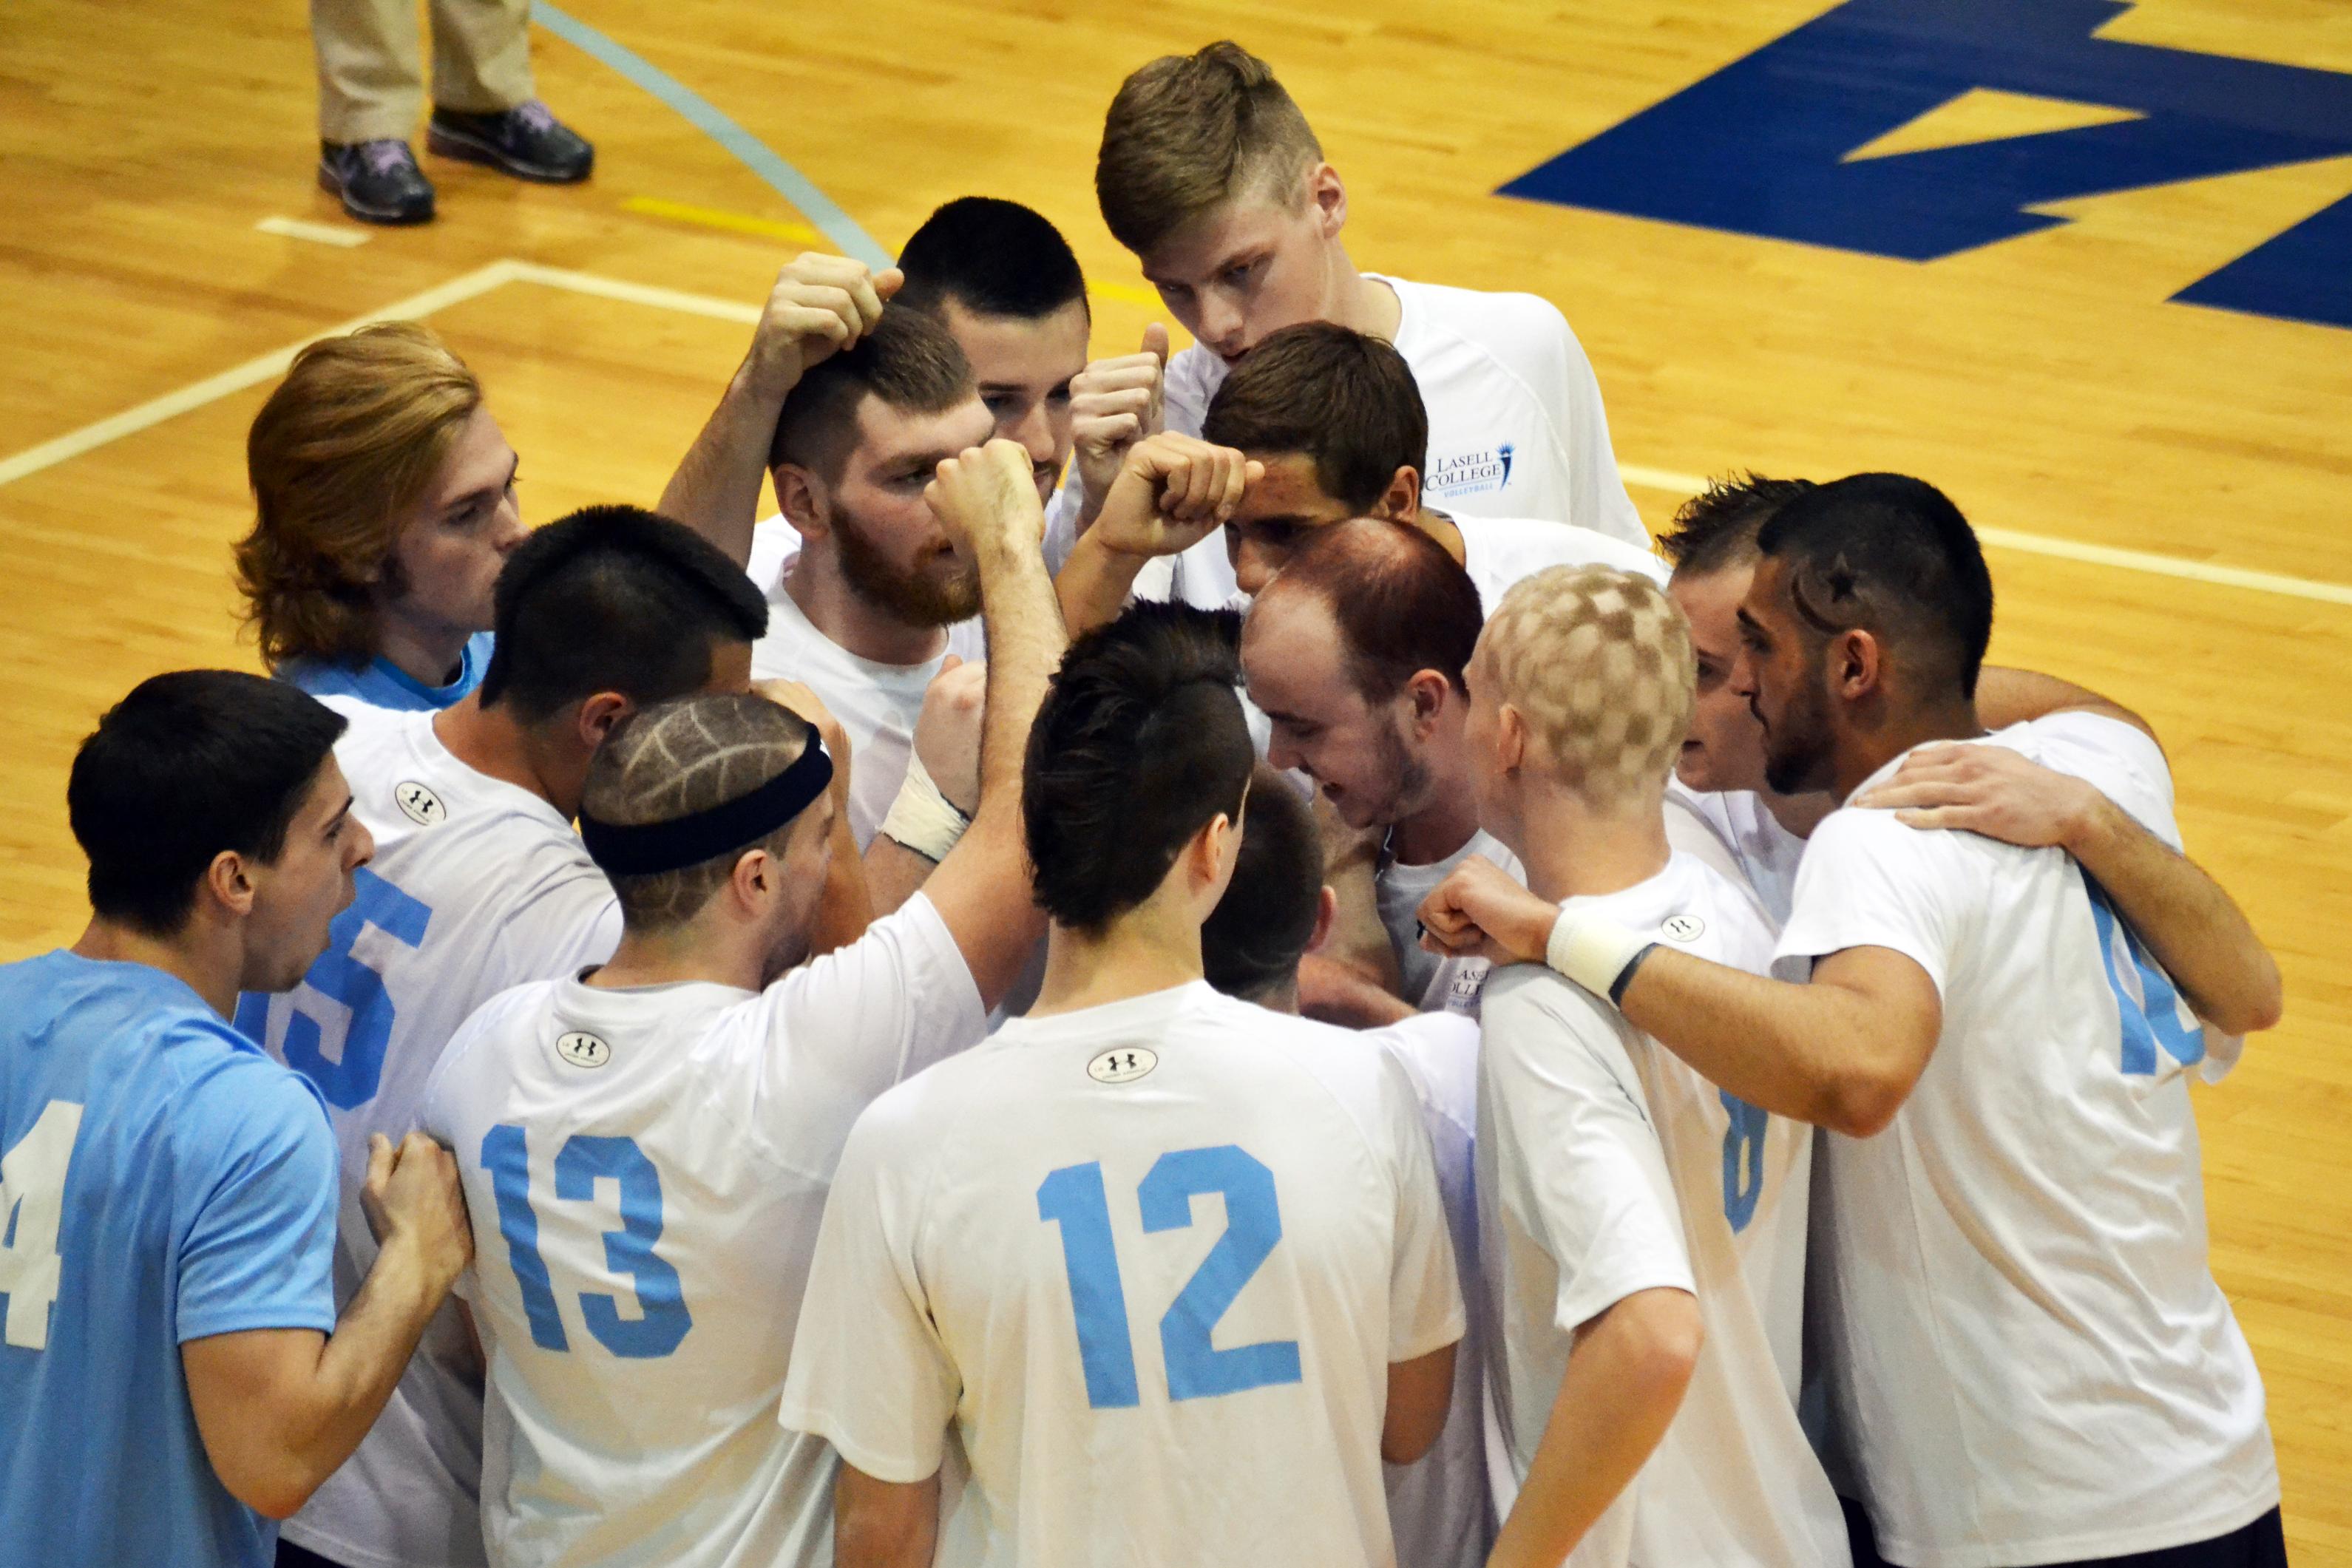 Men's Volleyball Remains Undefeated After Three 3-0 Victories at Live Free or Die Invite